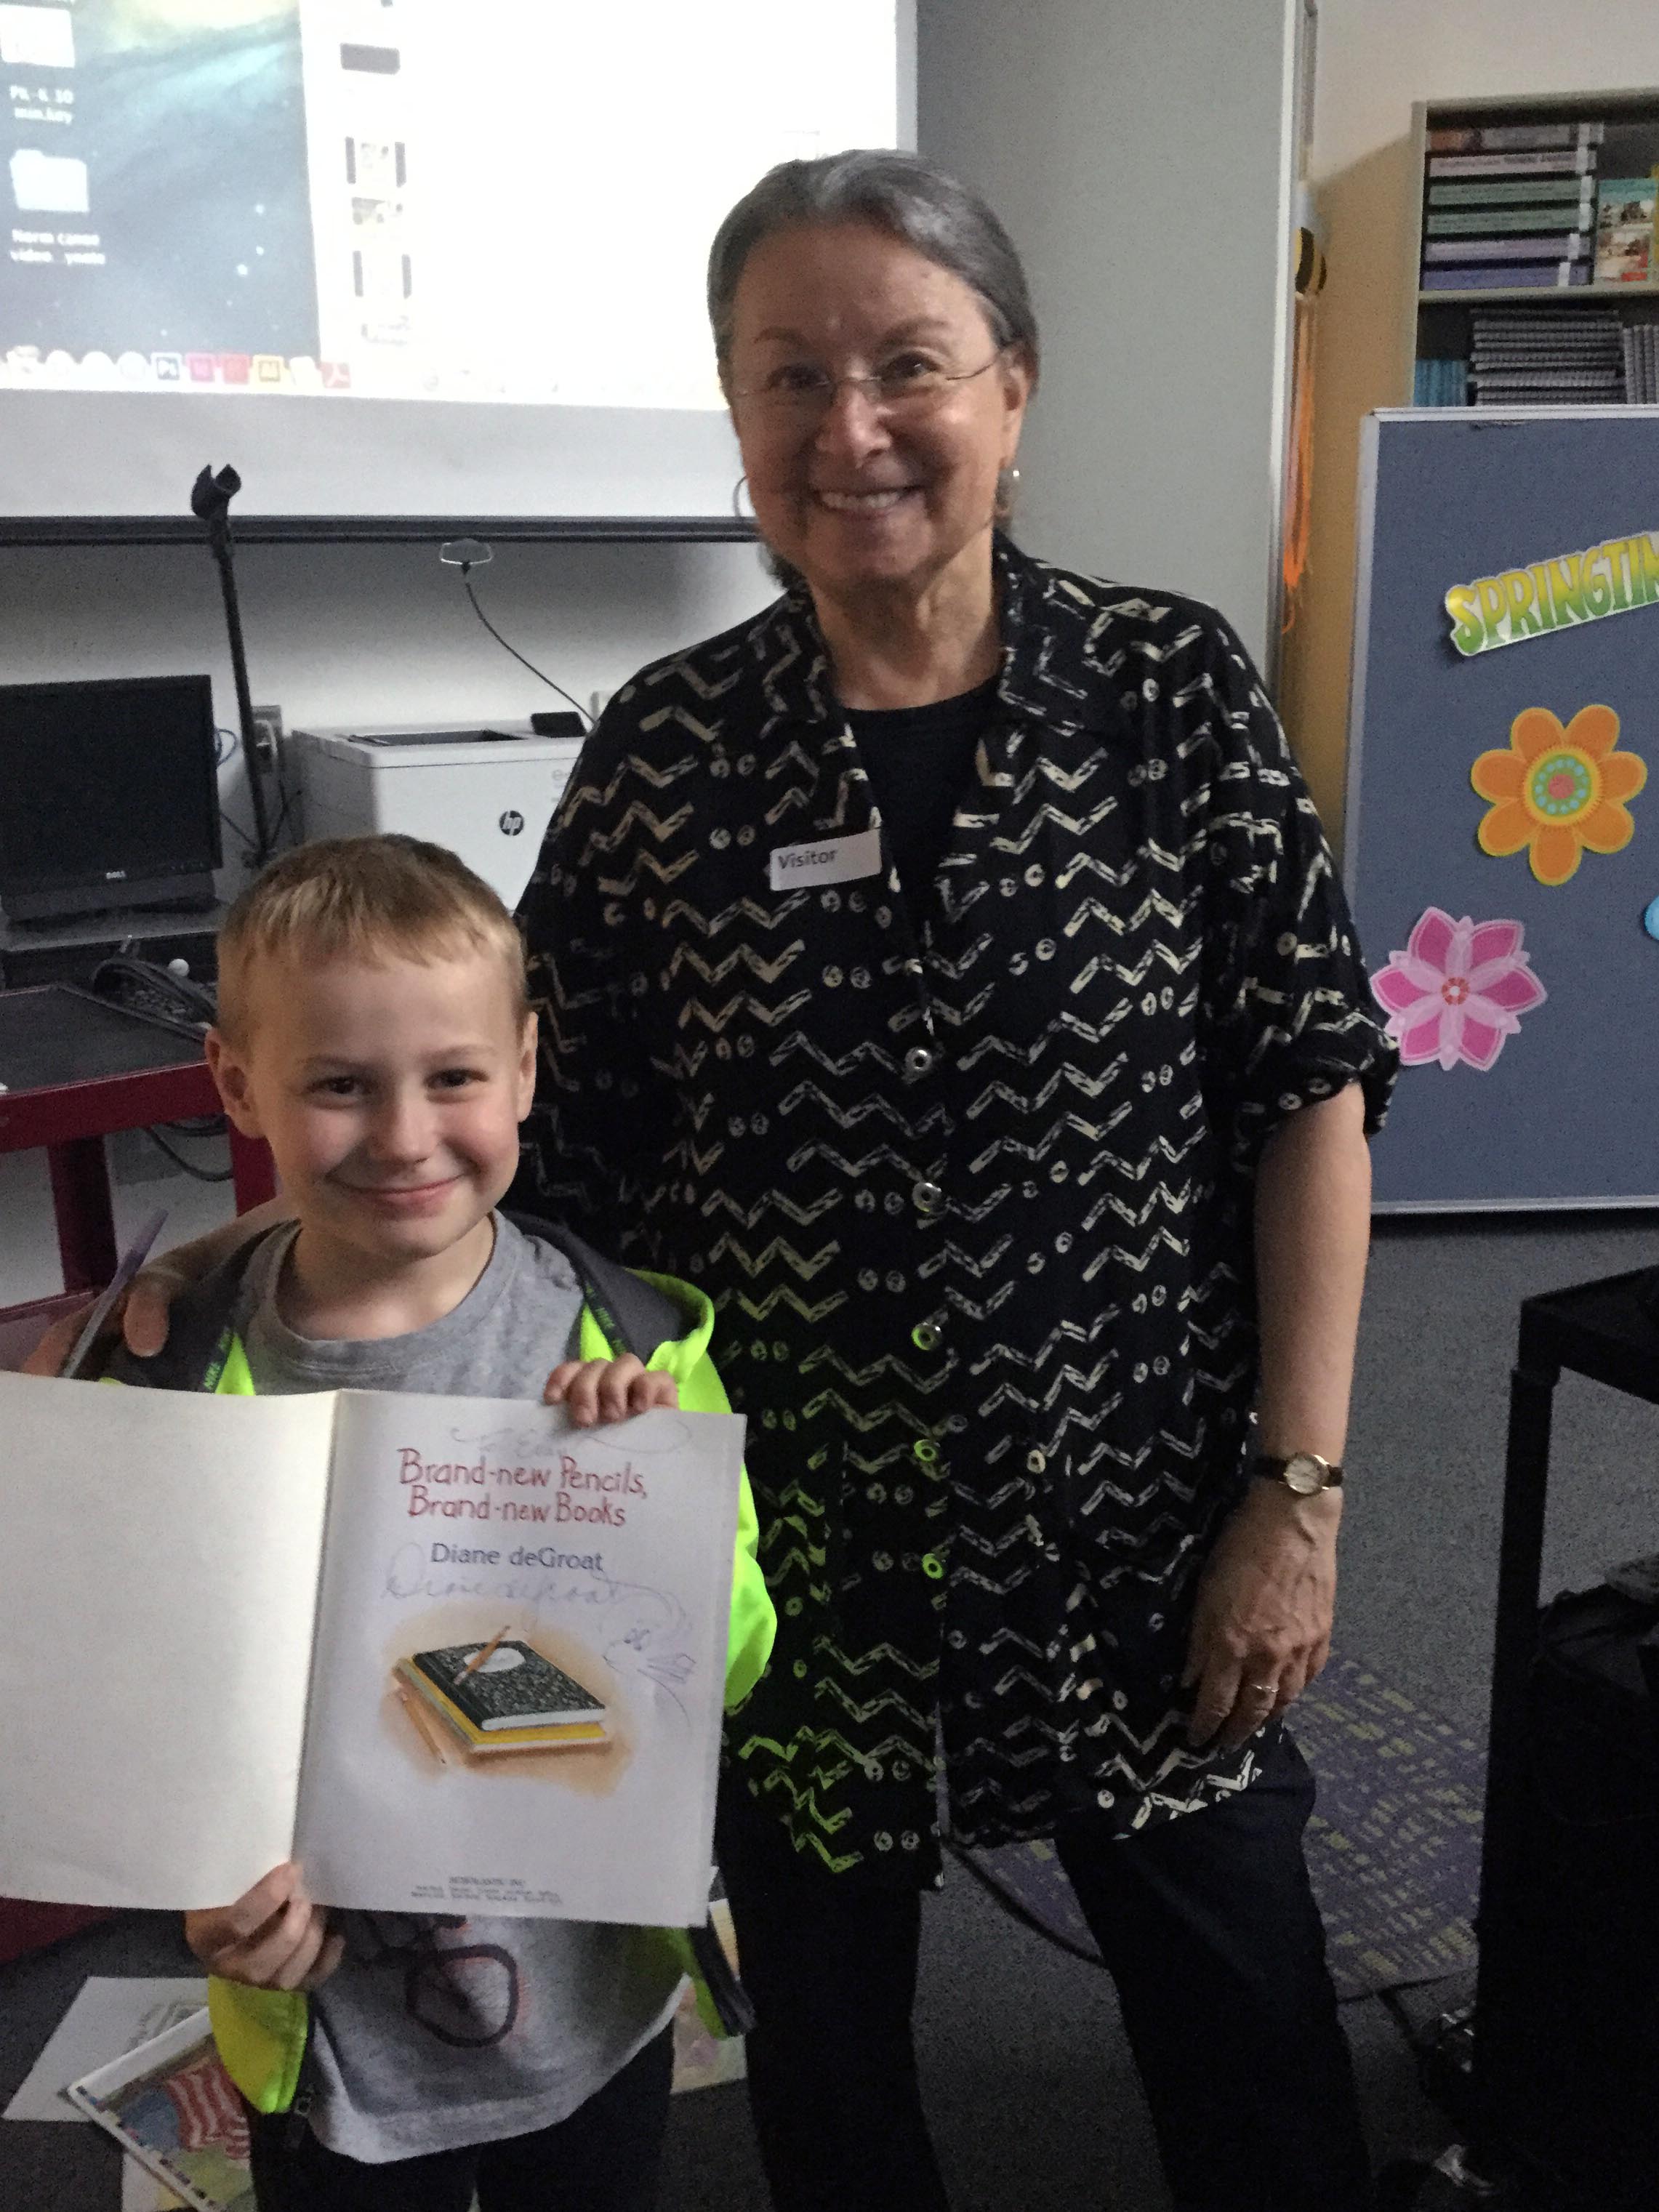 Diane DeGroat poses with student holding book